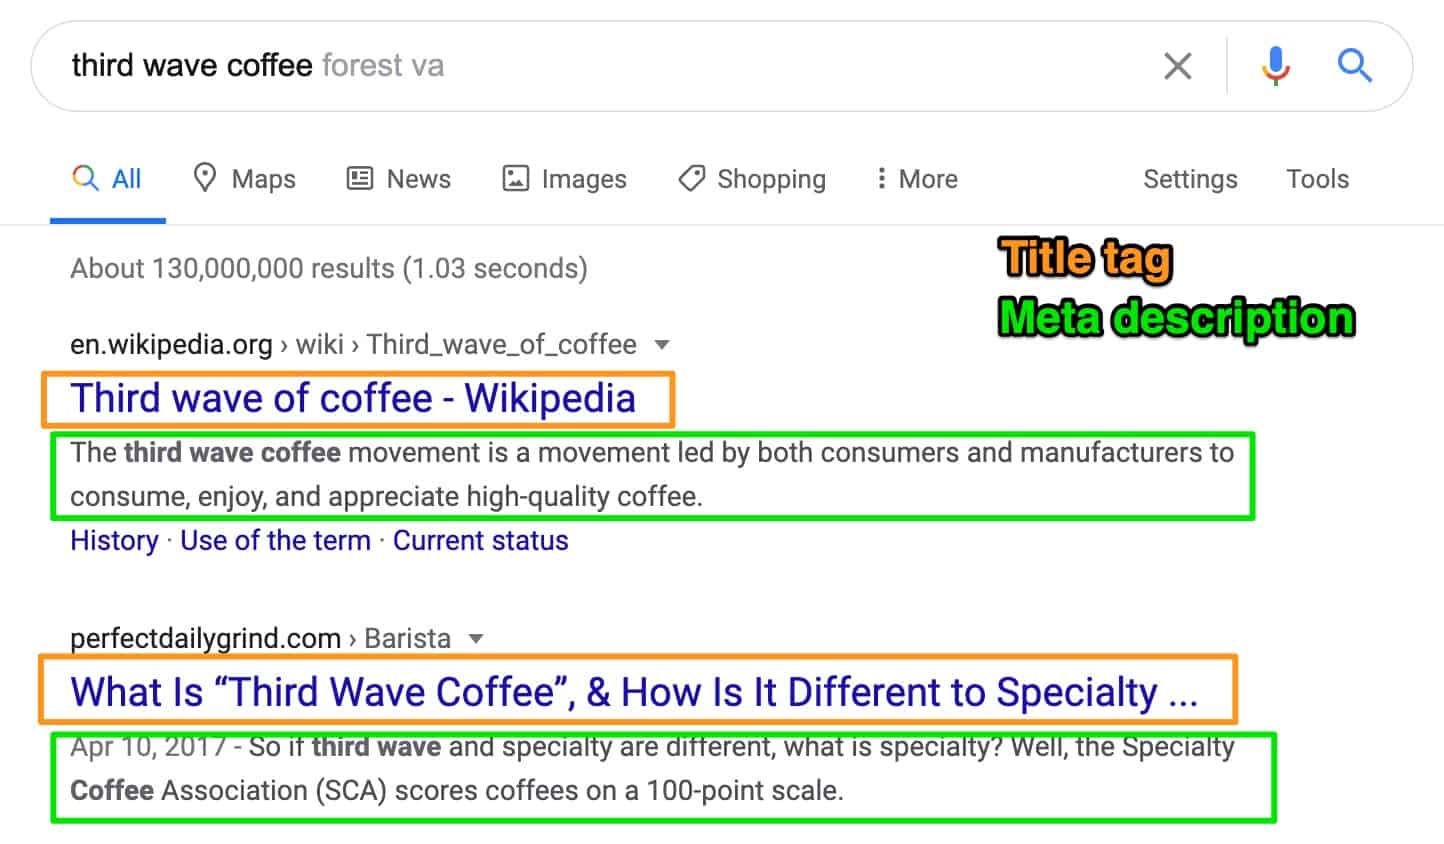 SERP example showing title tags and meta descripitons